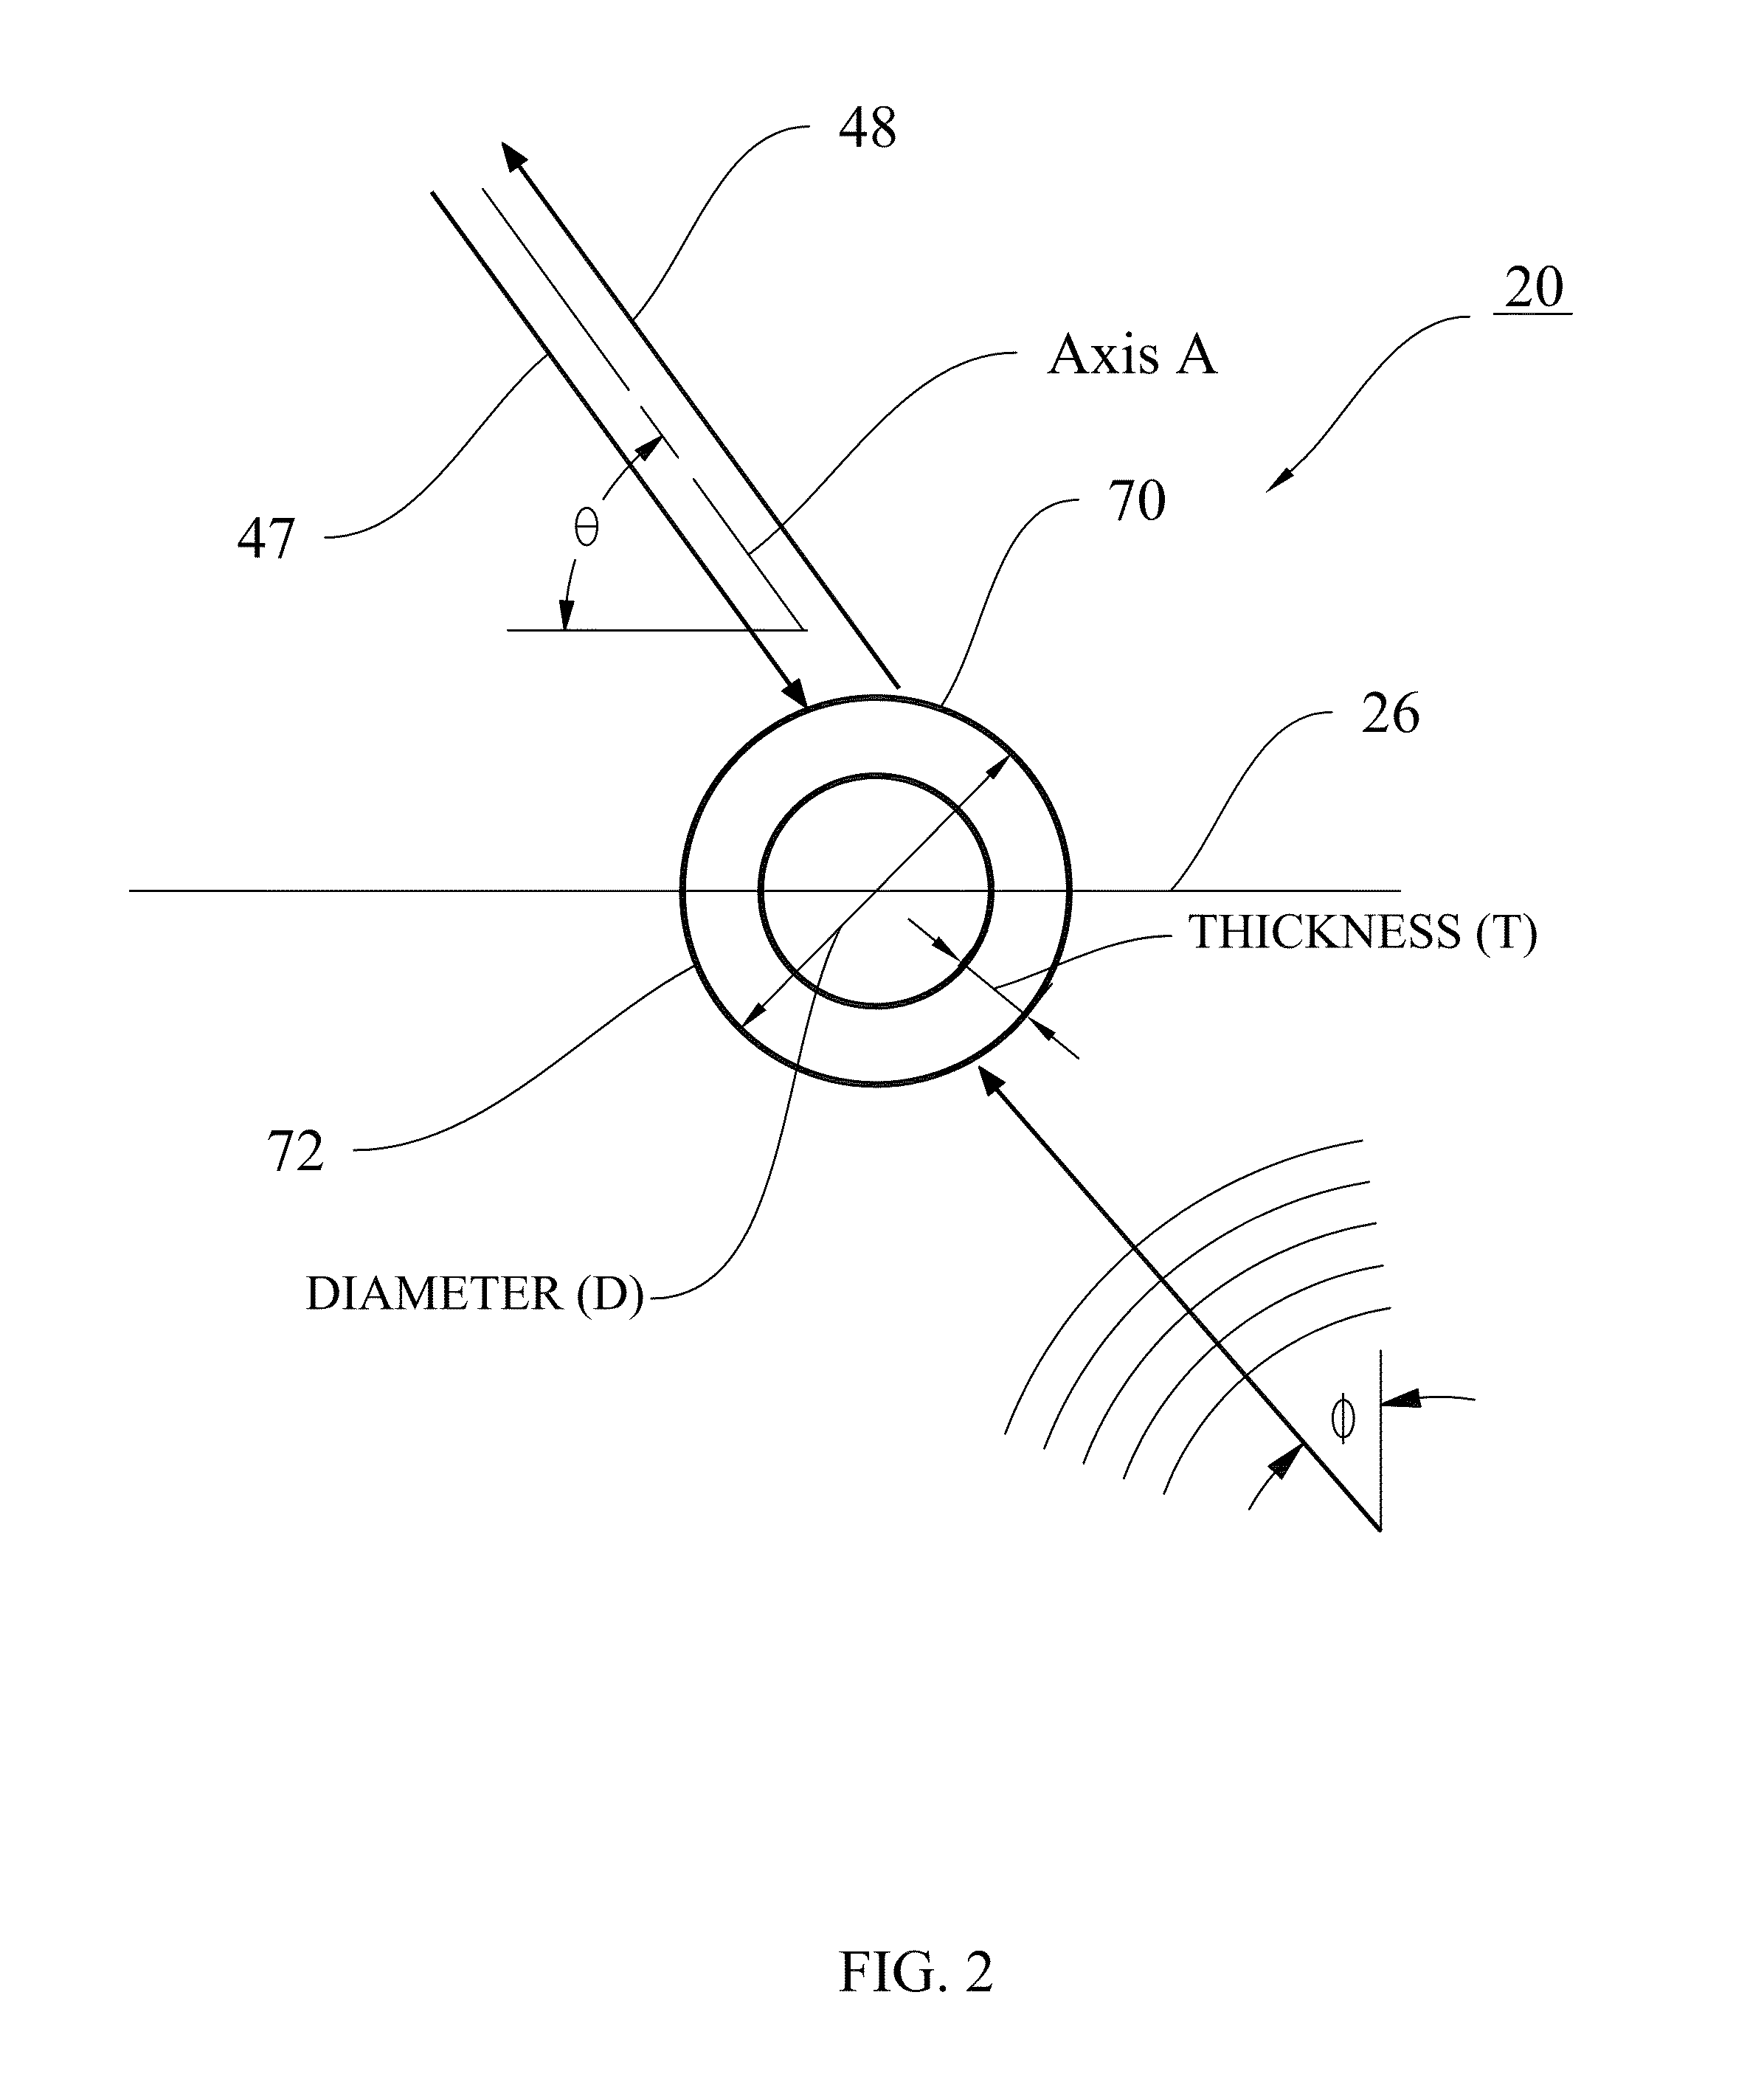 System for measuring vibrations occuring on a surface